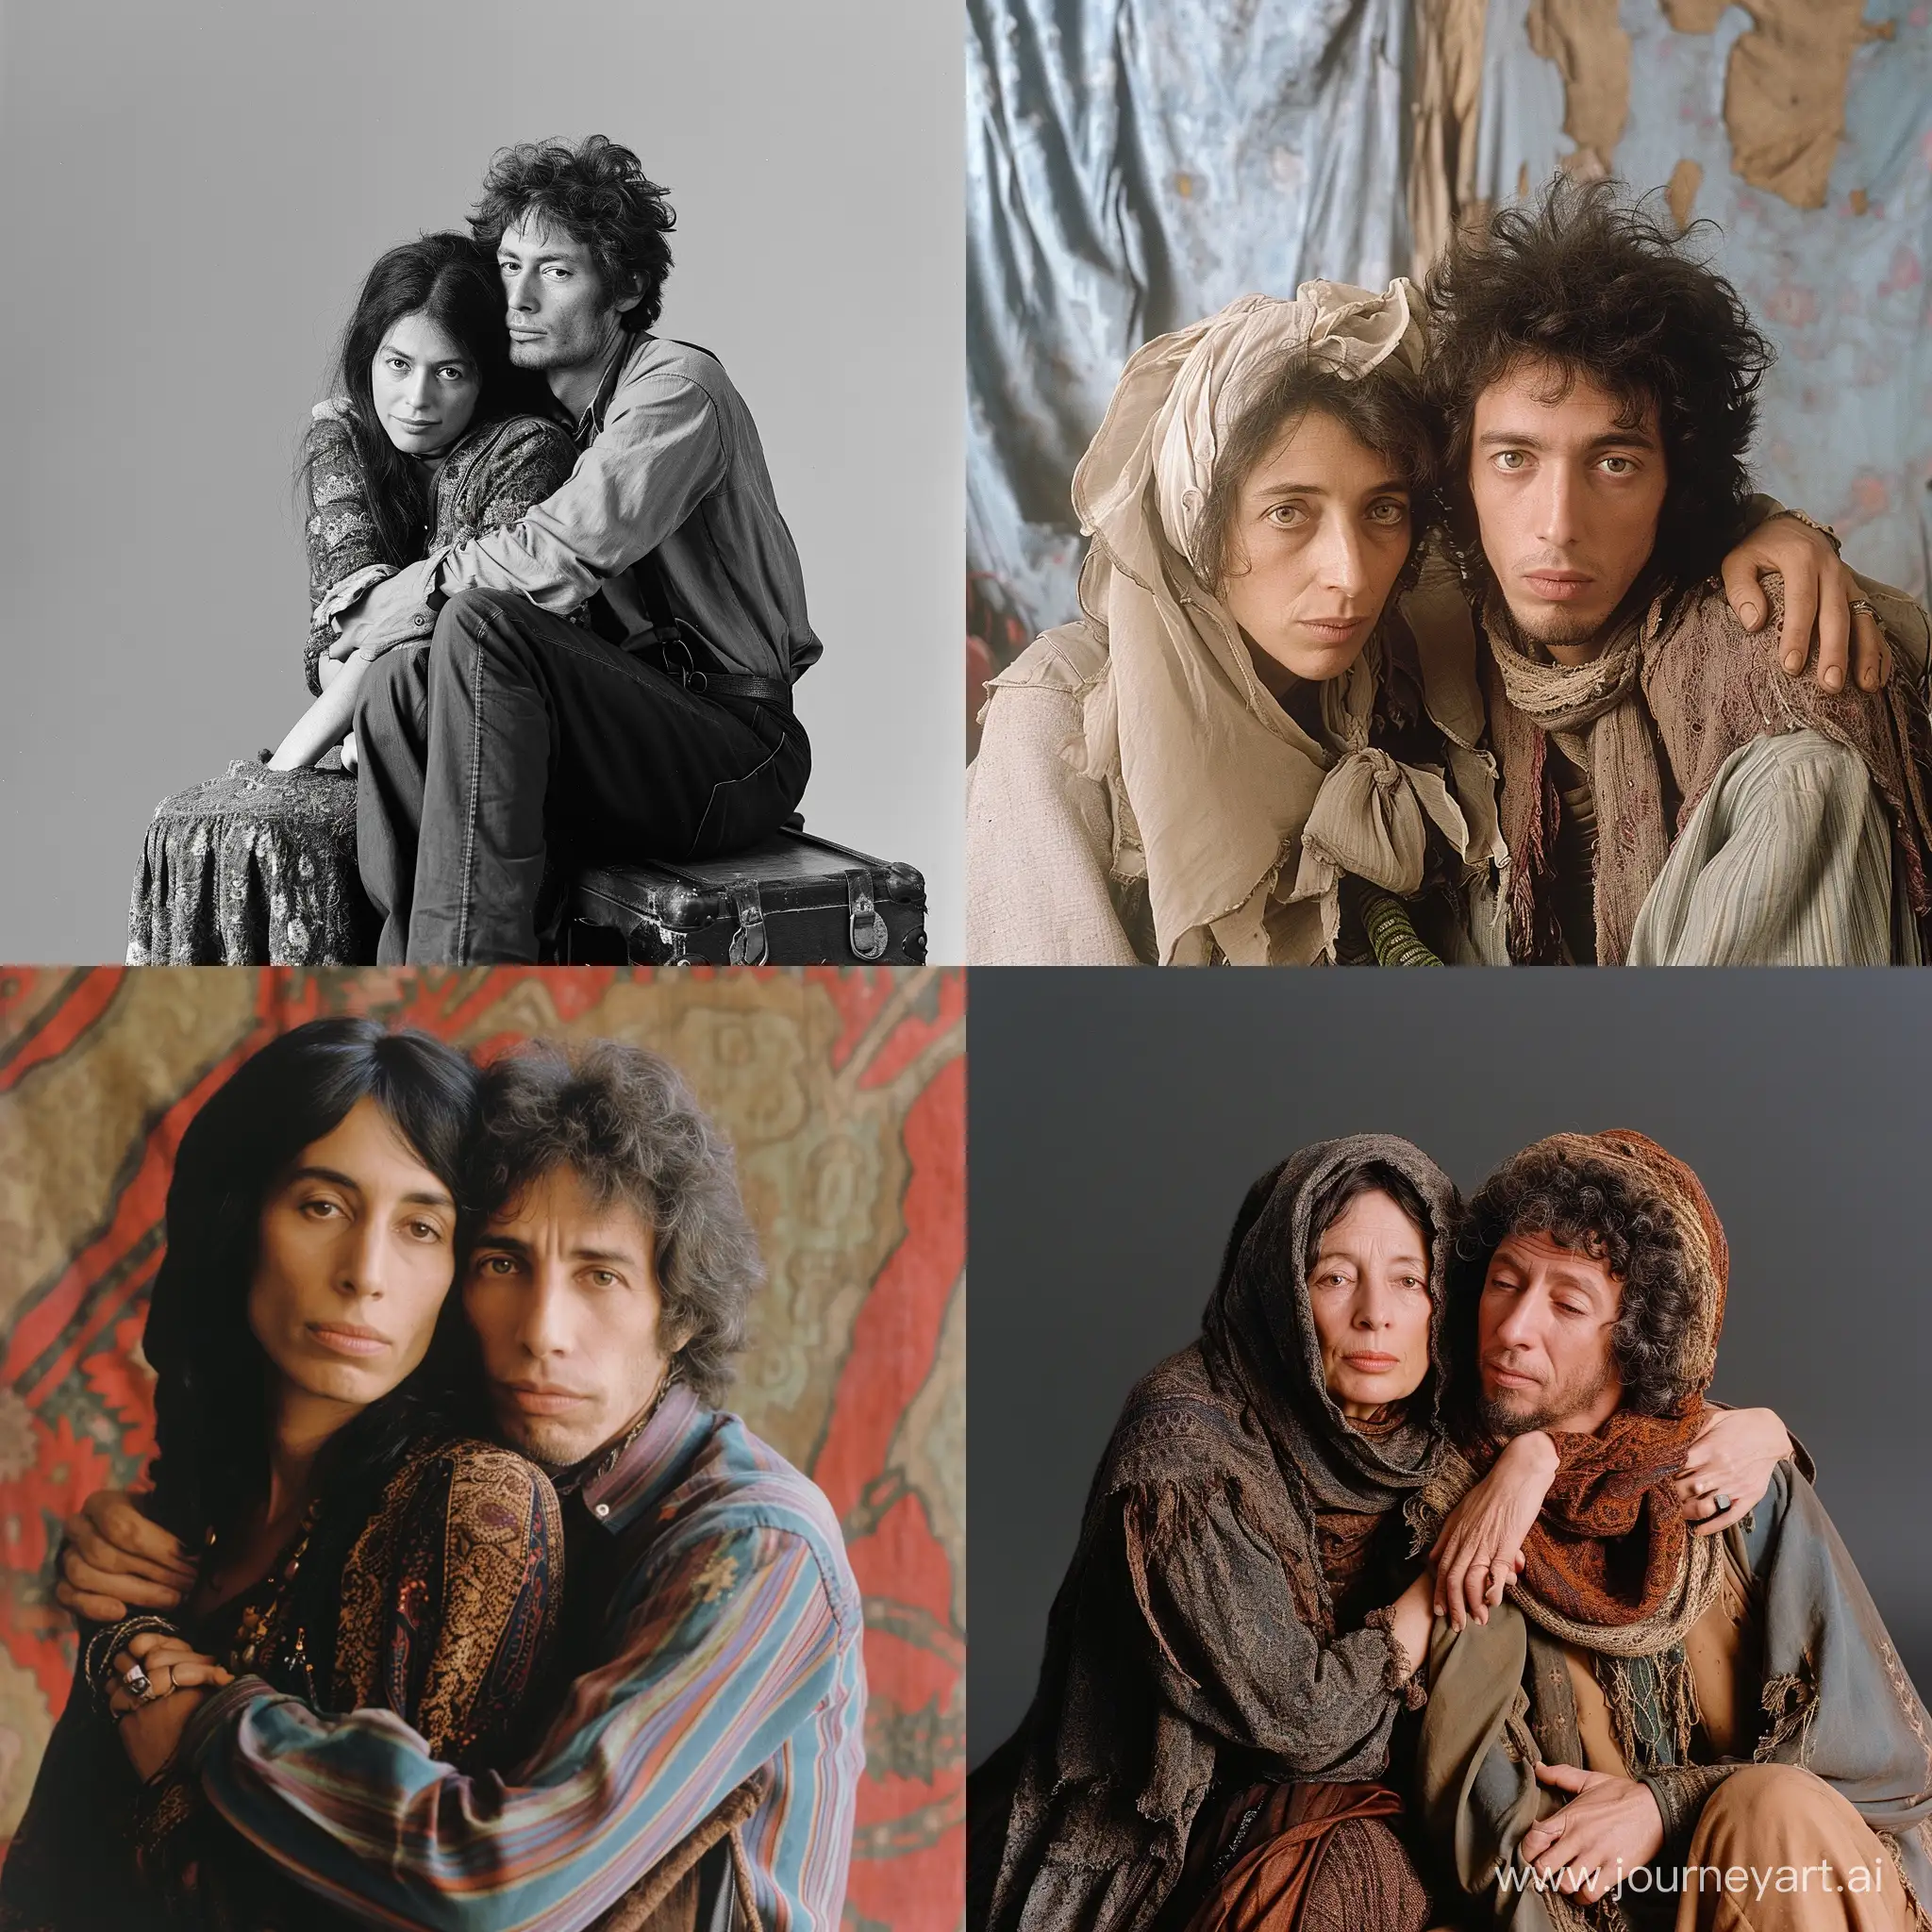 joan baez and bob dylan recreating the famous album cover photo of the music album"Unfinished Music No.1: Two Virgins"